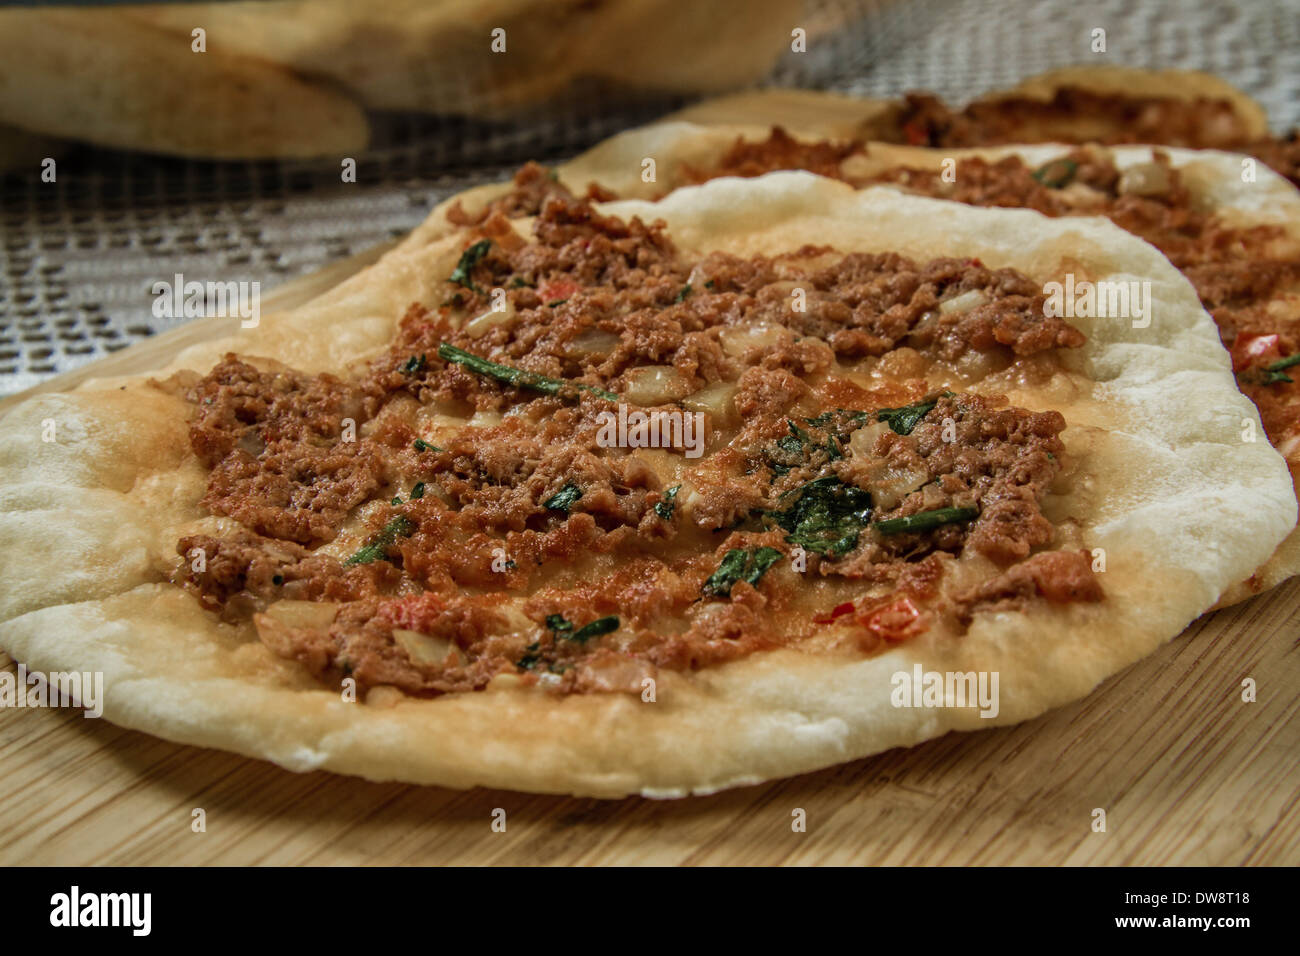 Hommade_turkish_pizza_lahmacun_on_a_hand